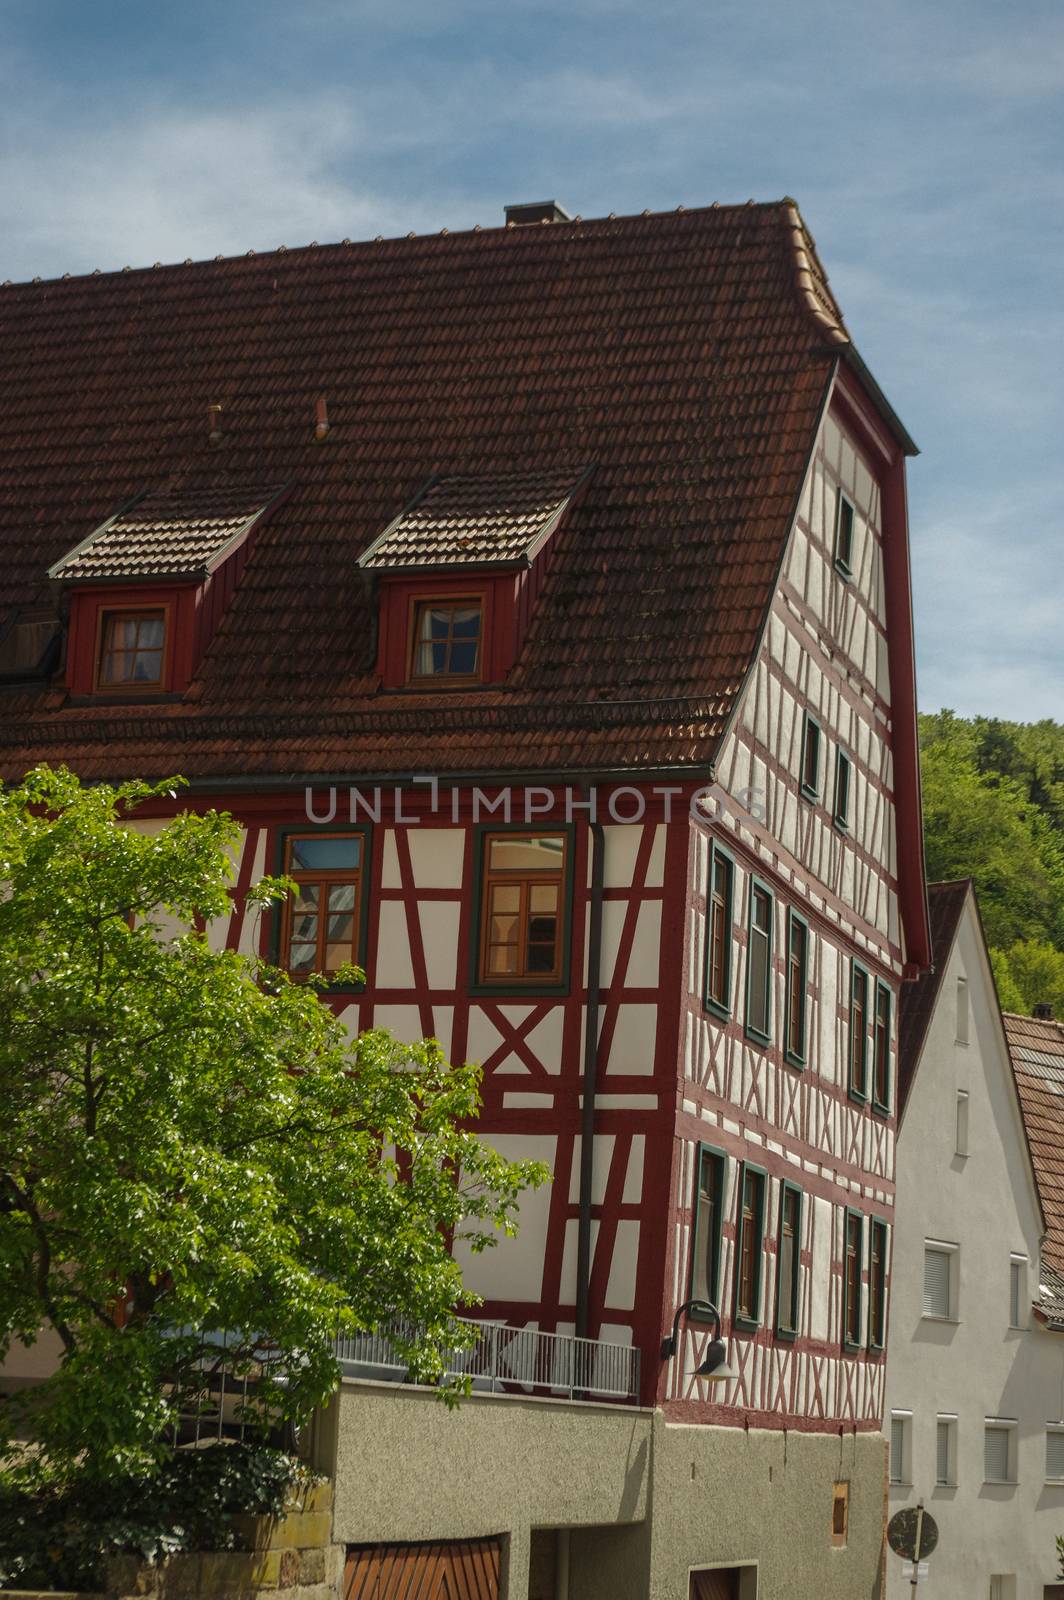 MOENSHEIM, PFORZHEIM, GERMANY - JUNE 10, 2015: Tudor style house. Monsheim is a town in the district of Enz in Baden-Wuerttemberg in southern BRD. by evolutionnow